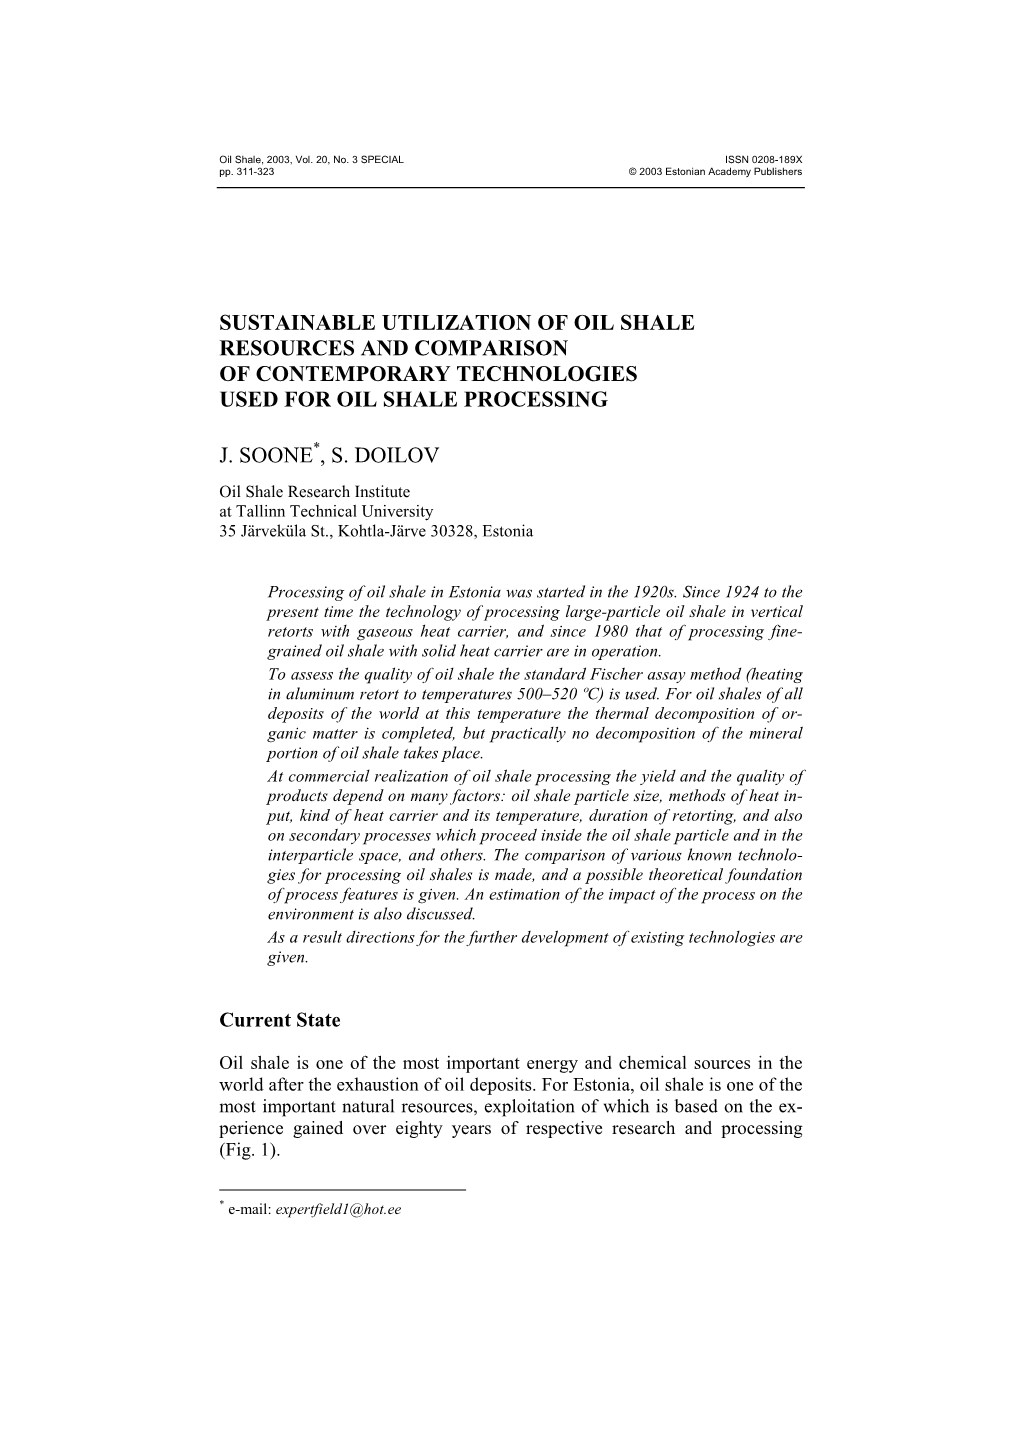 Sustainable Utilization of Oil Shale Resources and Comparison of Contemporary Technologies Used for Oil Shale Processing